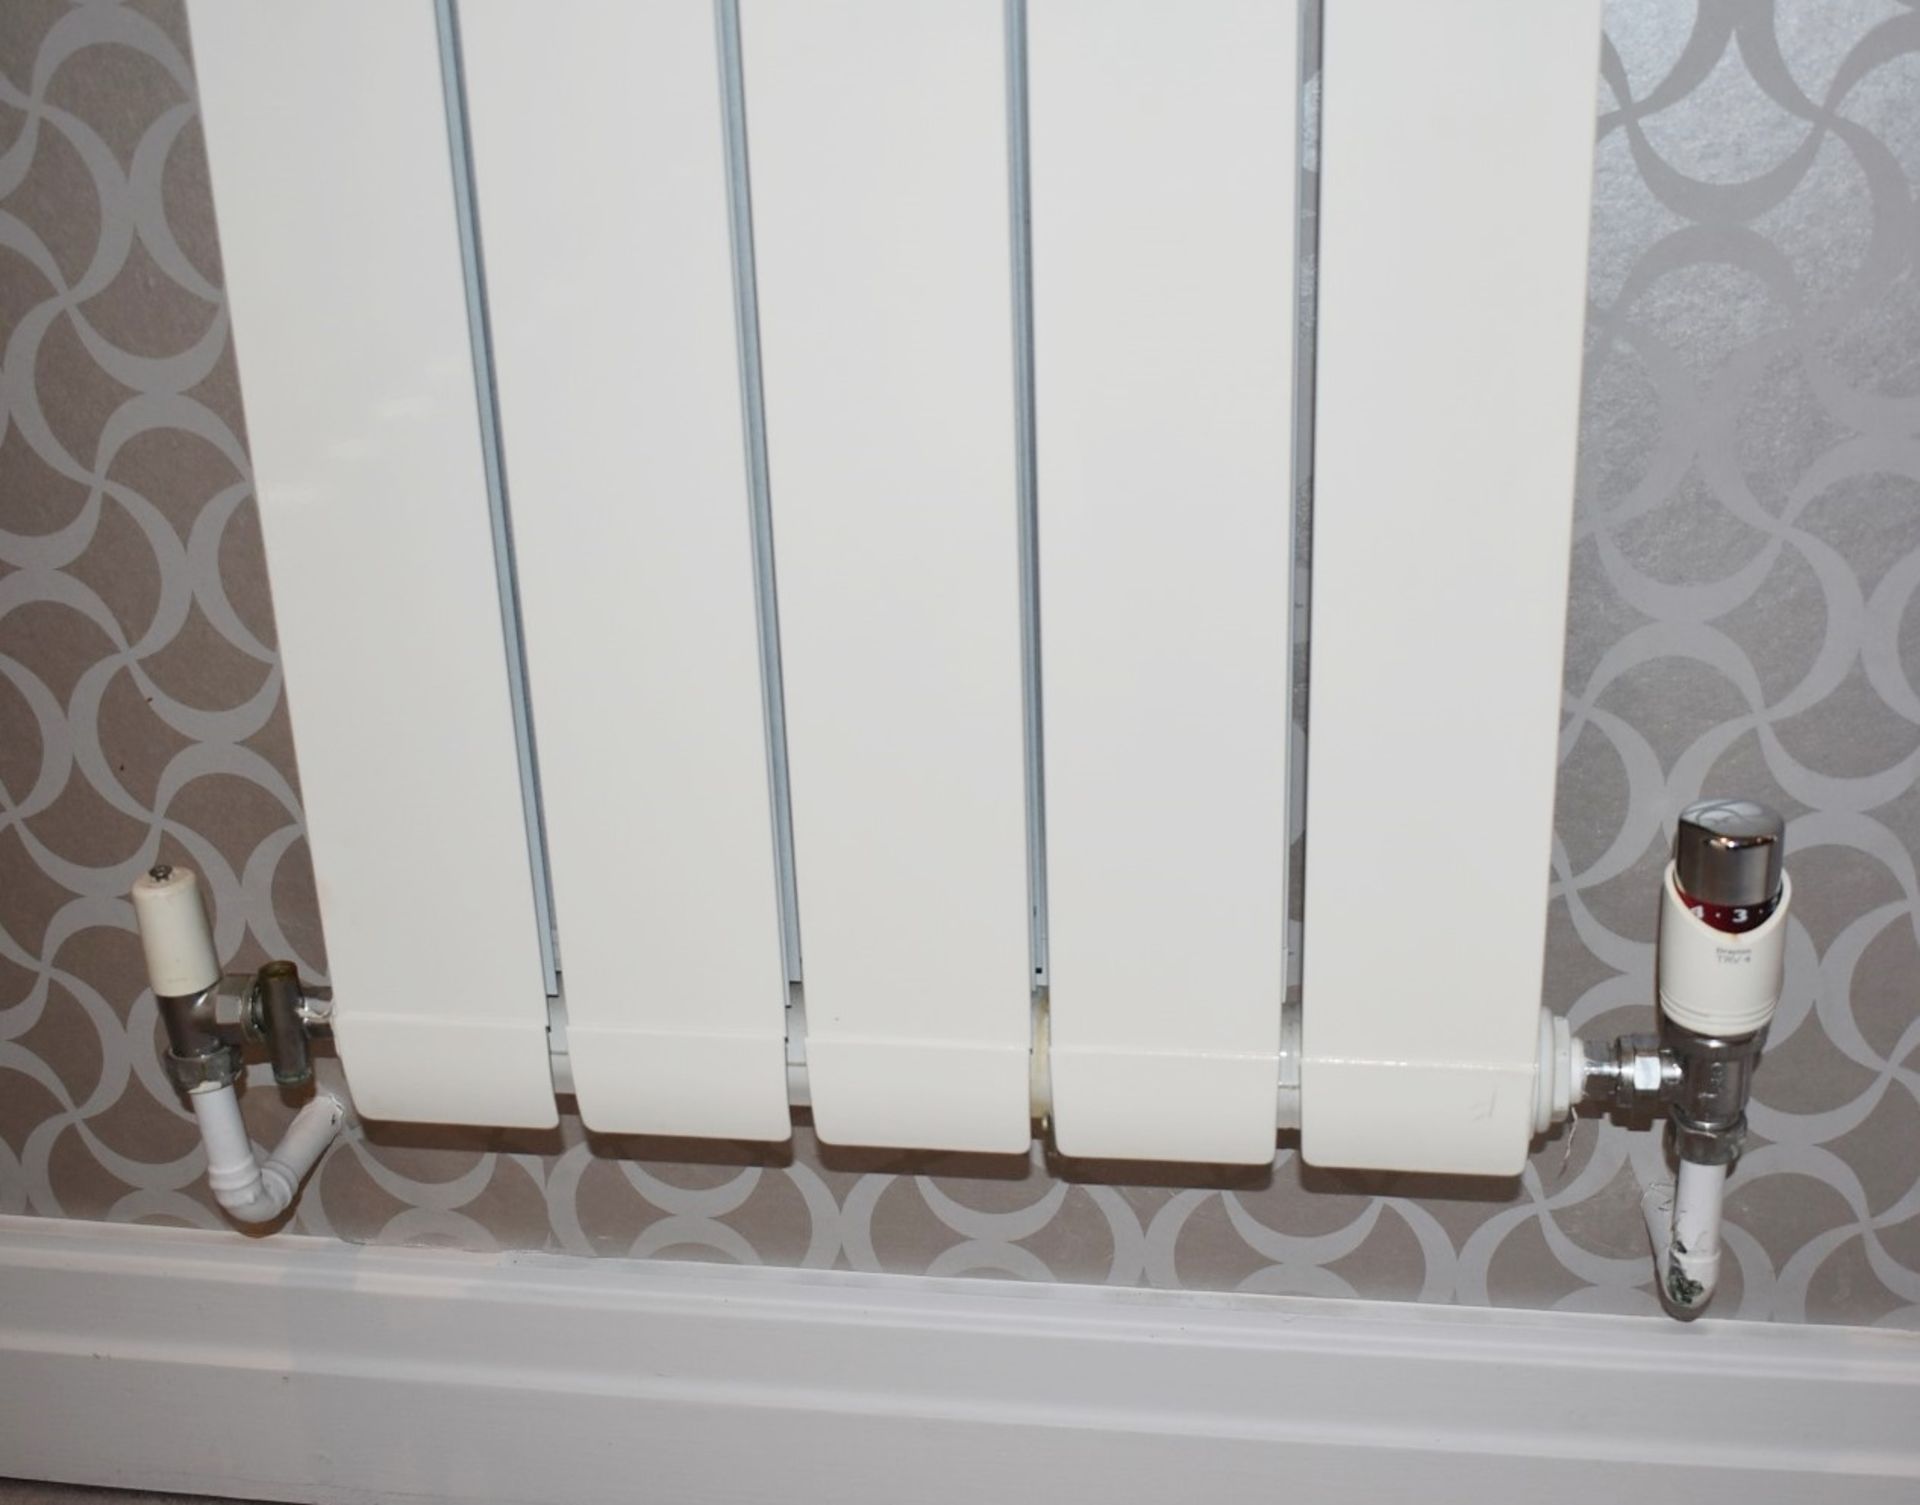 4 x Single Panel Vertical Wall Mounted Radiators - Ref: RR10 / LNG - CL781 - Location: Hale Barns - Image 6 of 8